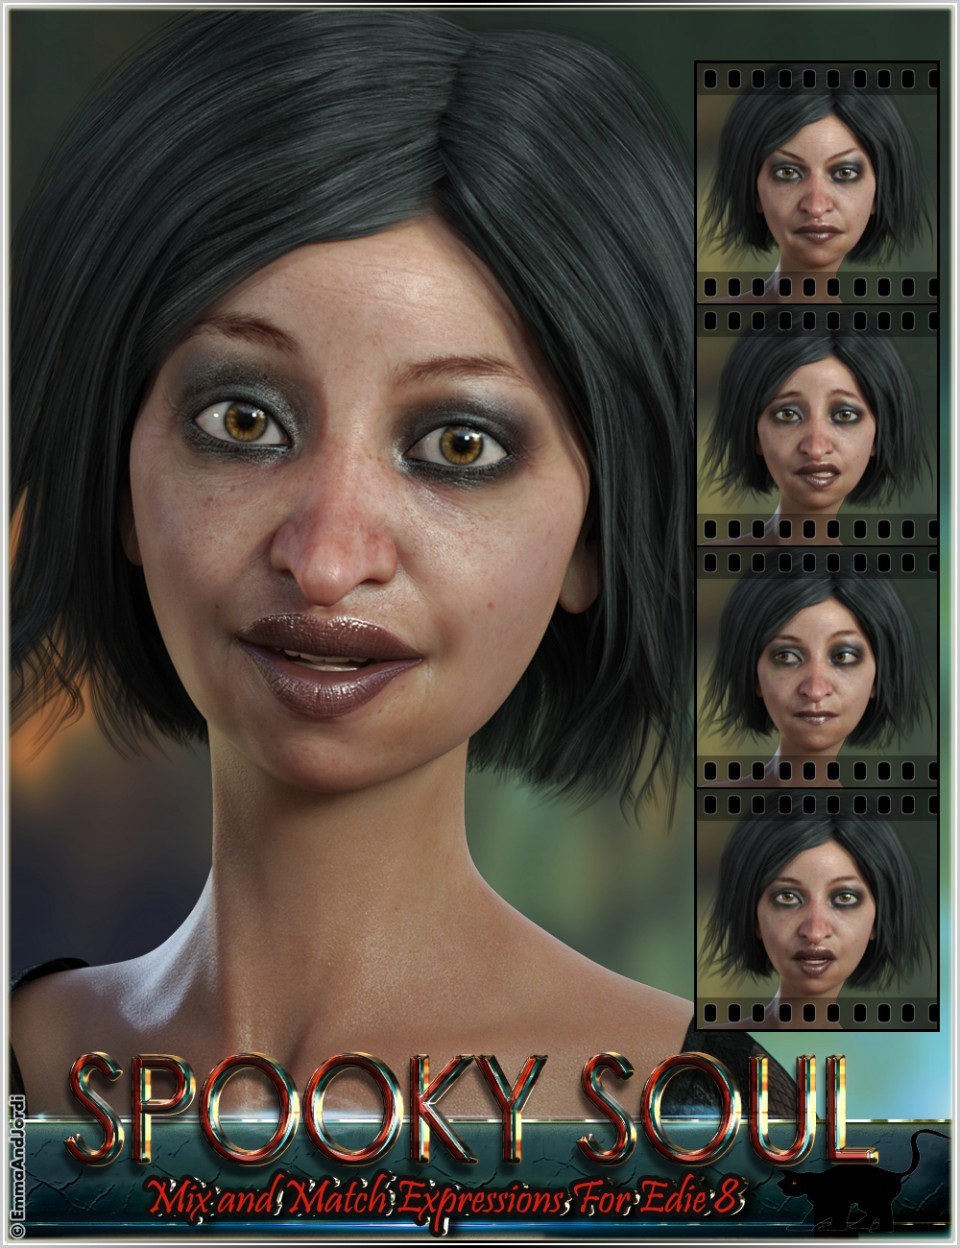 spooky-soul-mix-and-match-expressions-for-edie-8-and-genesis-8-female